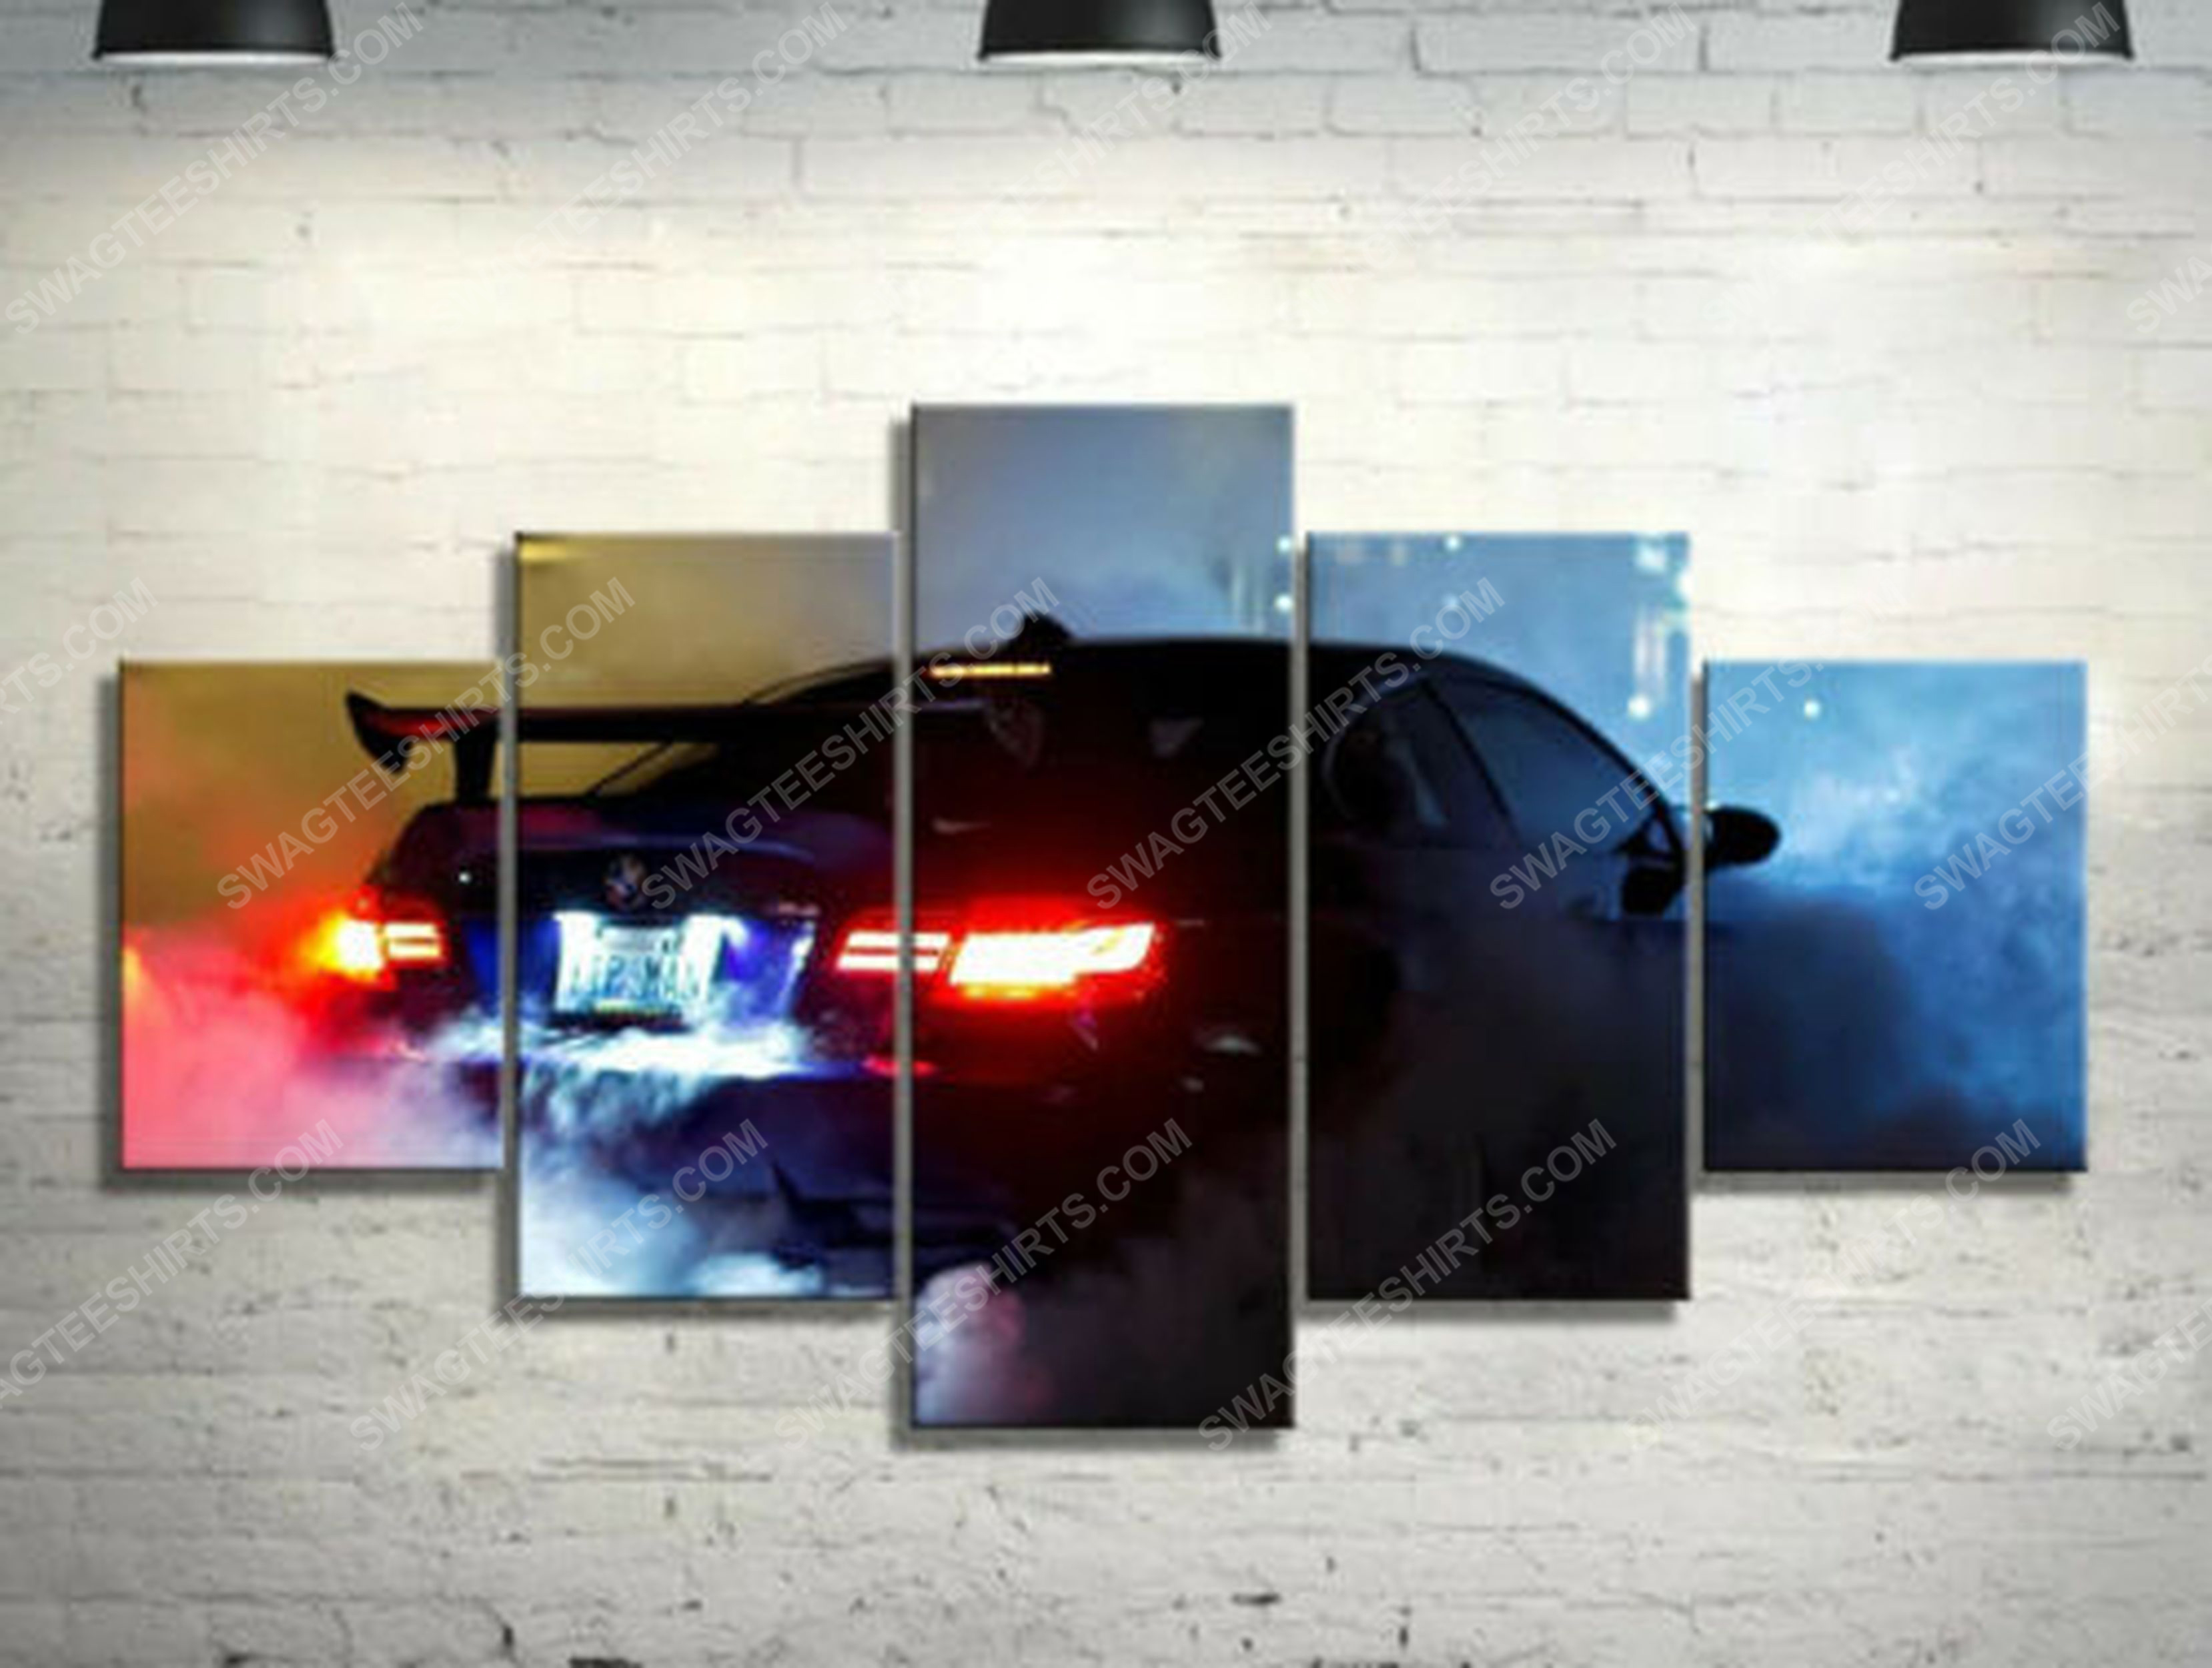 [special edition] The bmw m3 sports car print painting canvas wall art home decor – maria